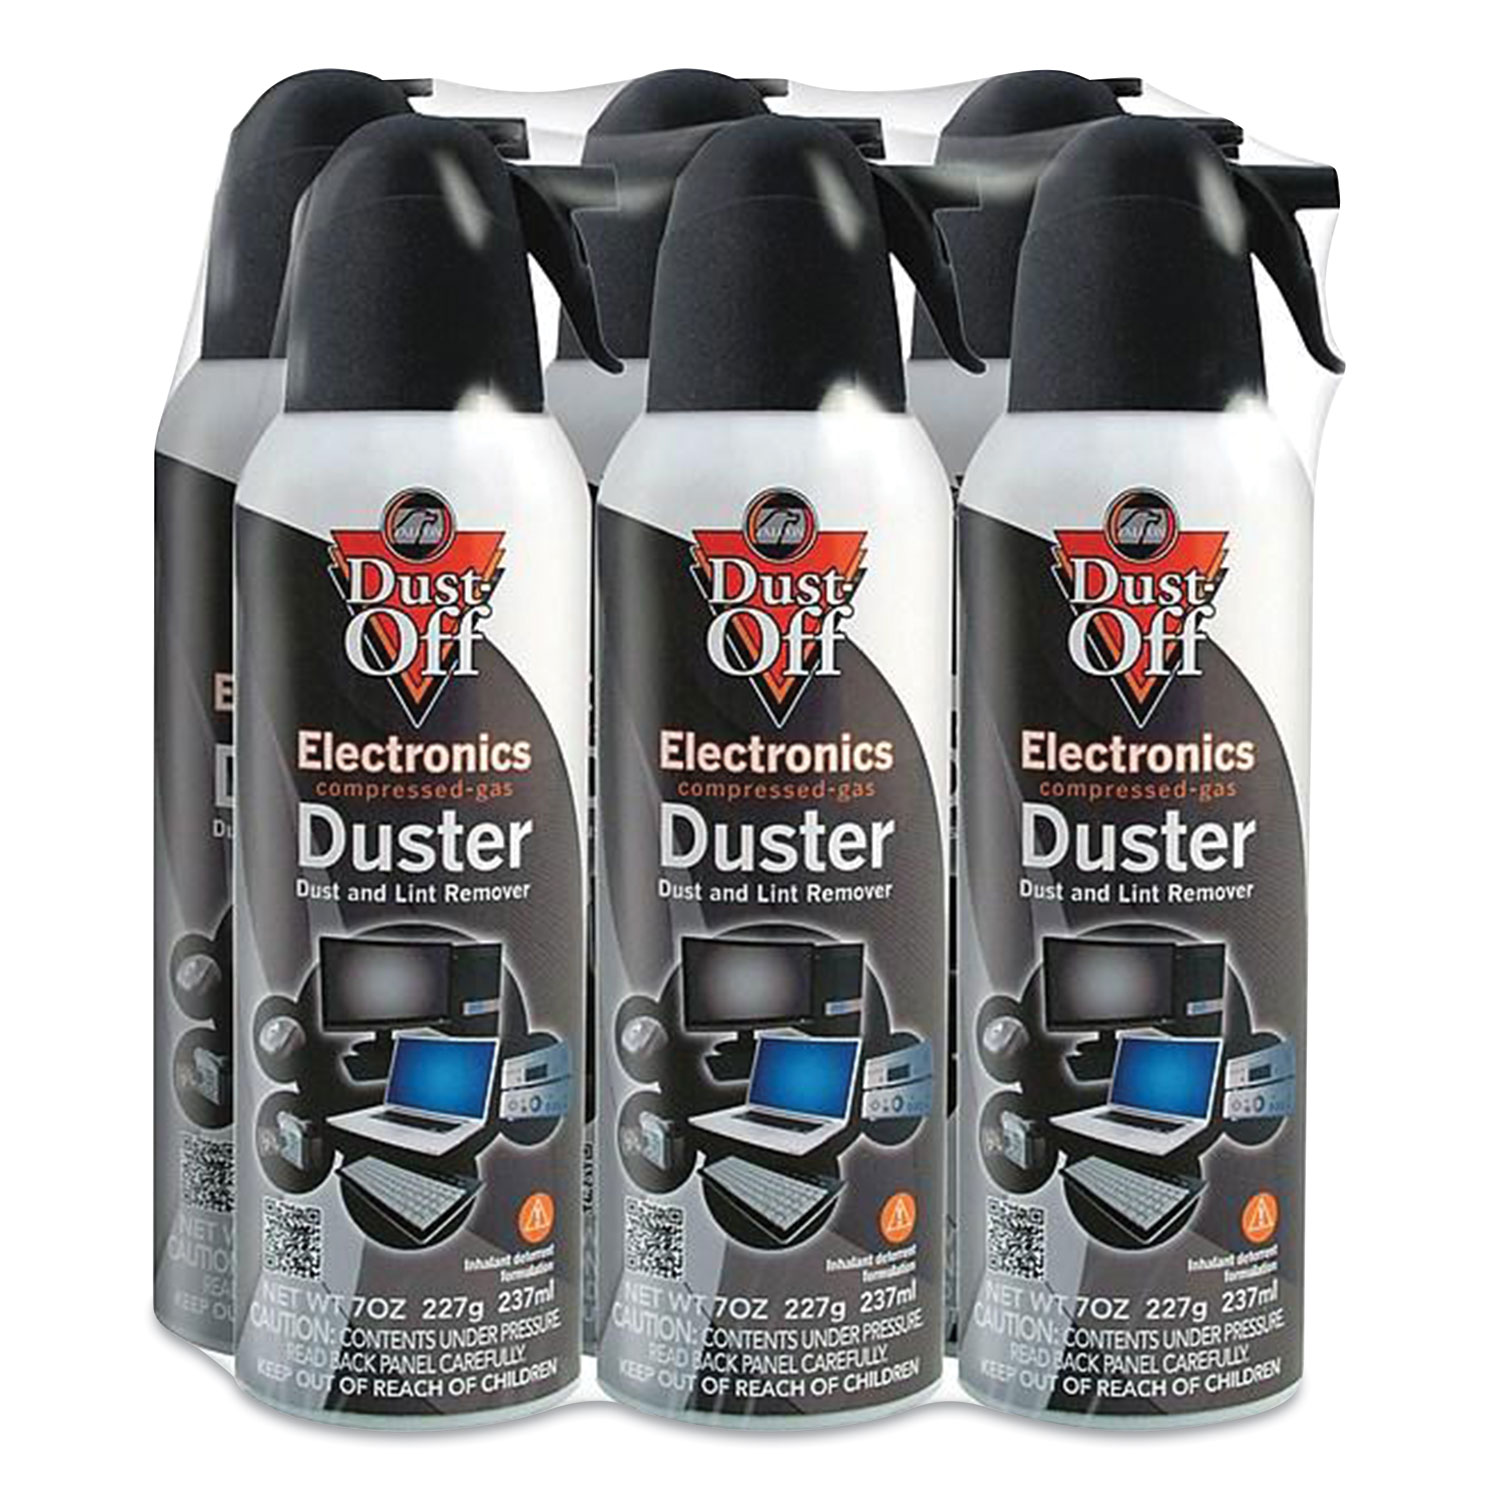  Dust-Off DPSM6 Disposable Compressed Gas Duster, 7 oz Can, 6/Pack (DOF356652) 